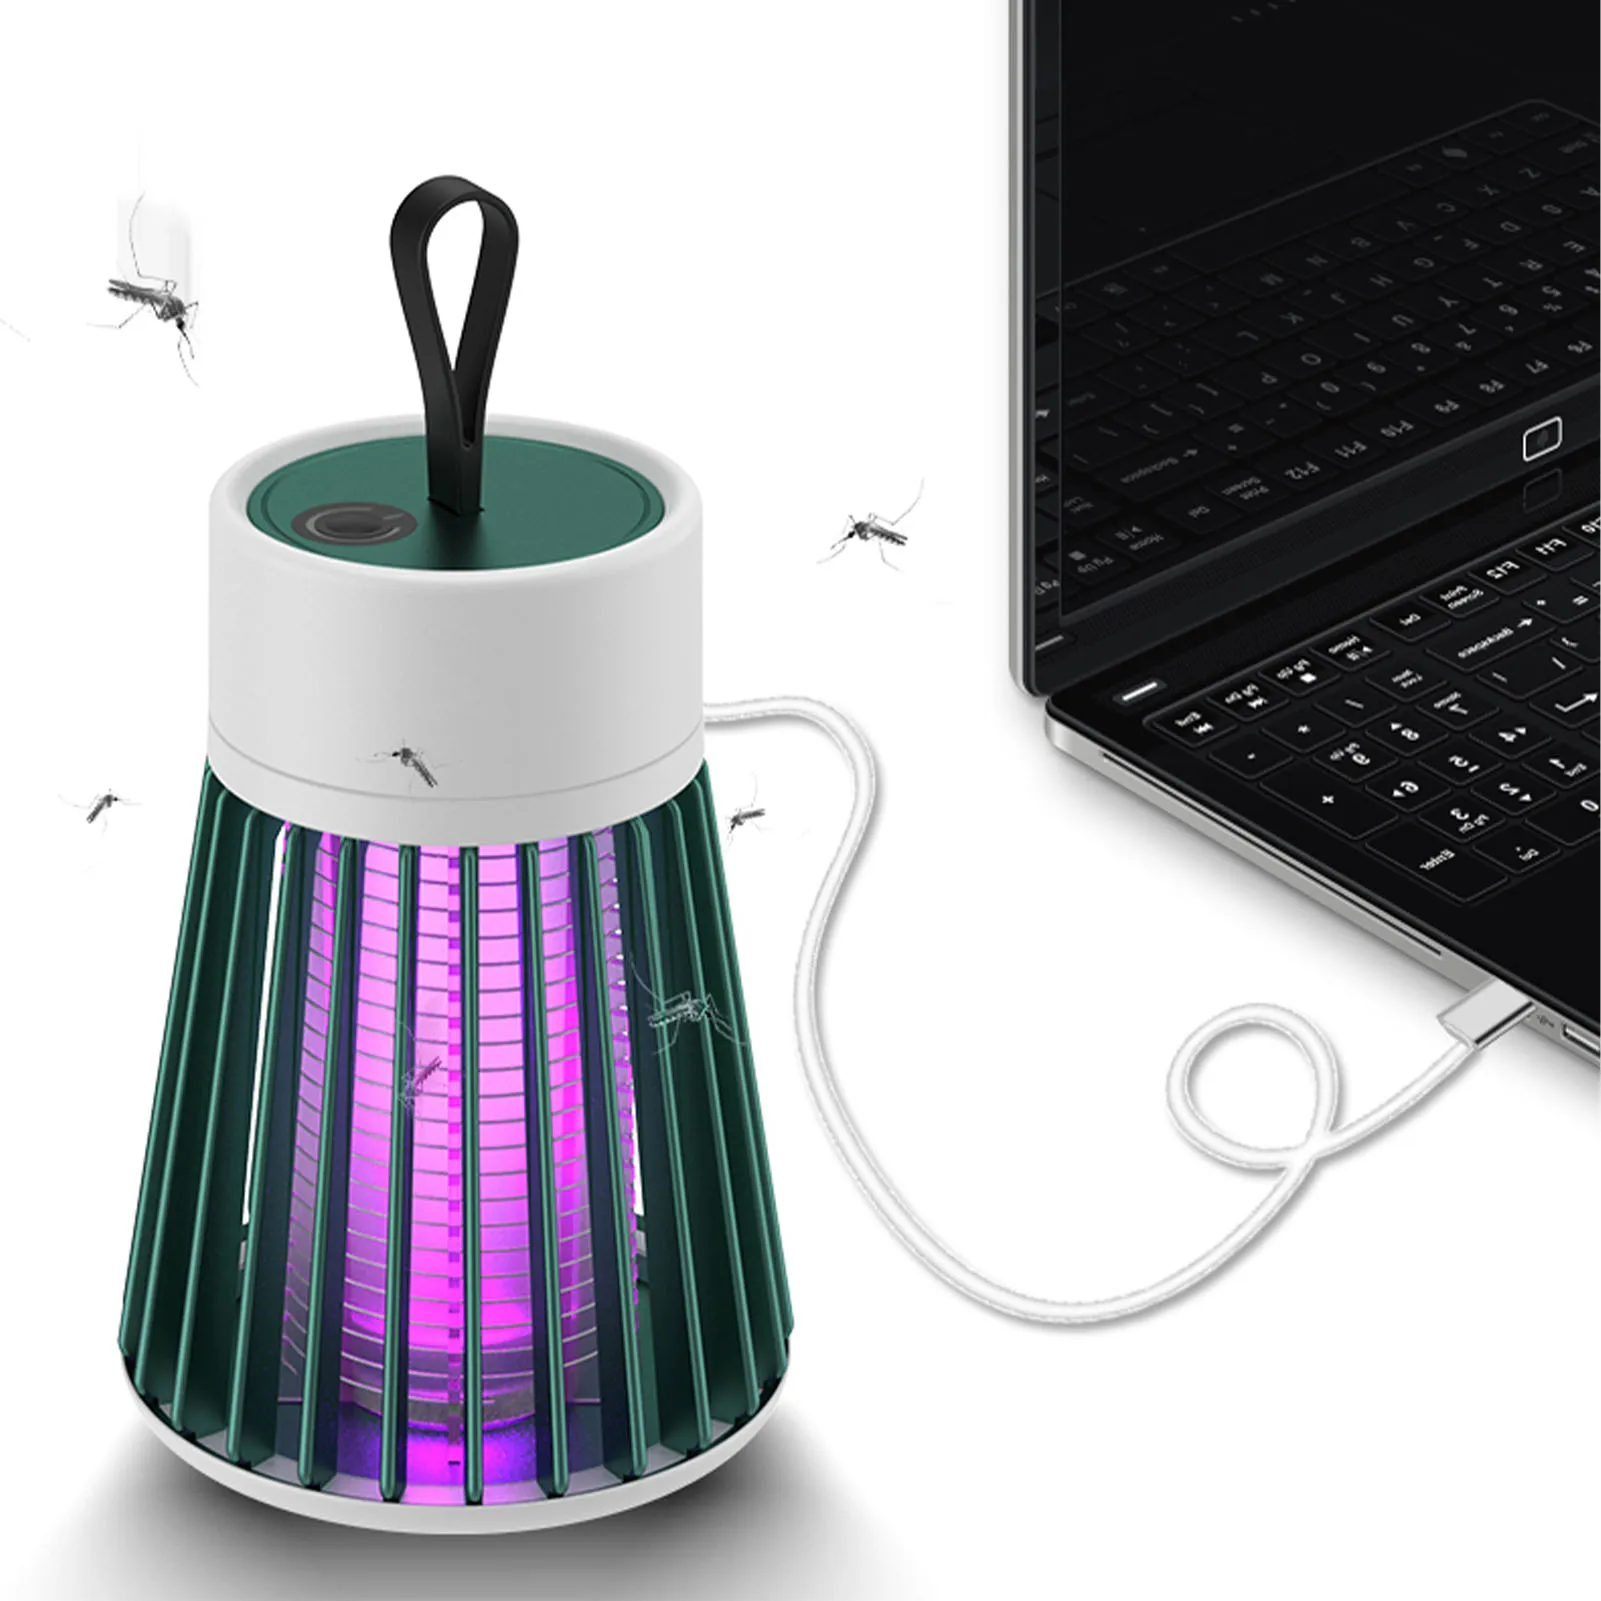 

LED Mosquito Killer Lamp DC 5W Electrical USB Bug Zapper Insect Killer Anti Mosquito Repellent Indoor Outdoor Muggen Fly Trap